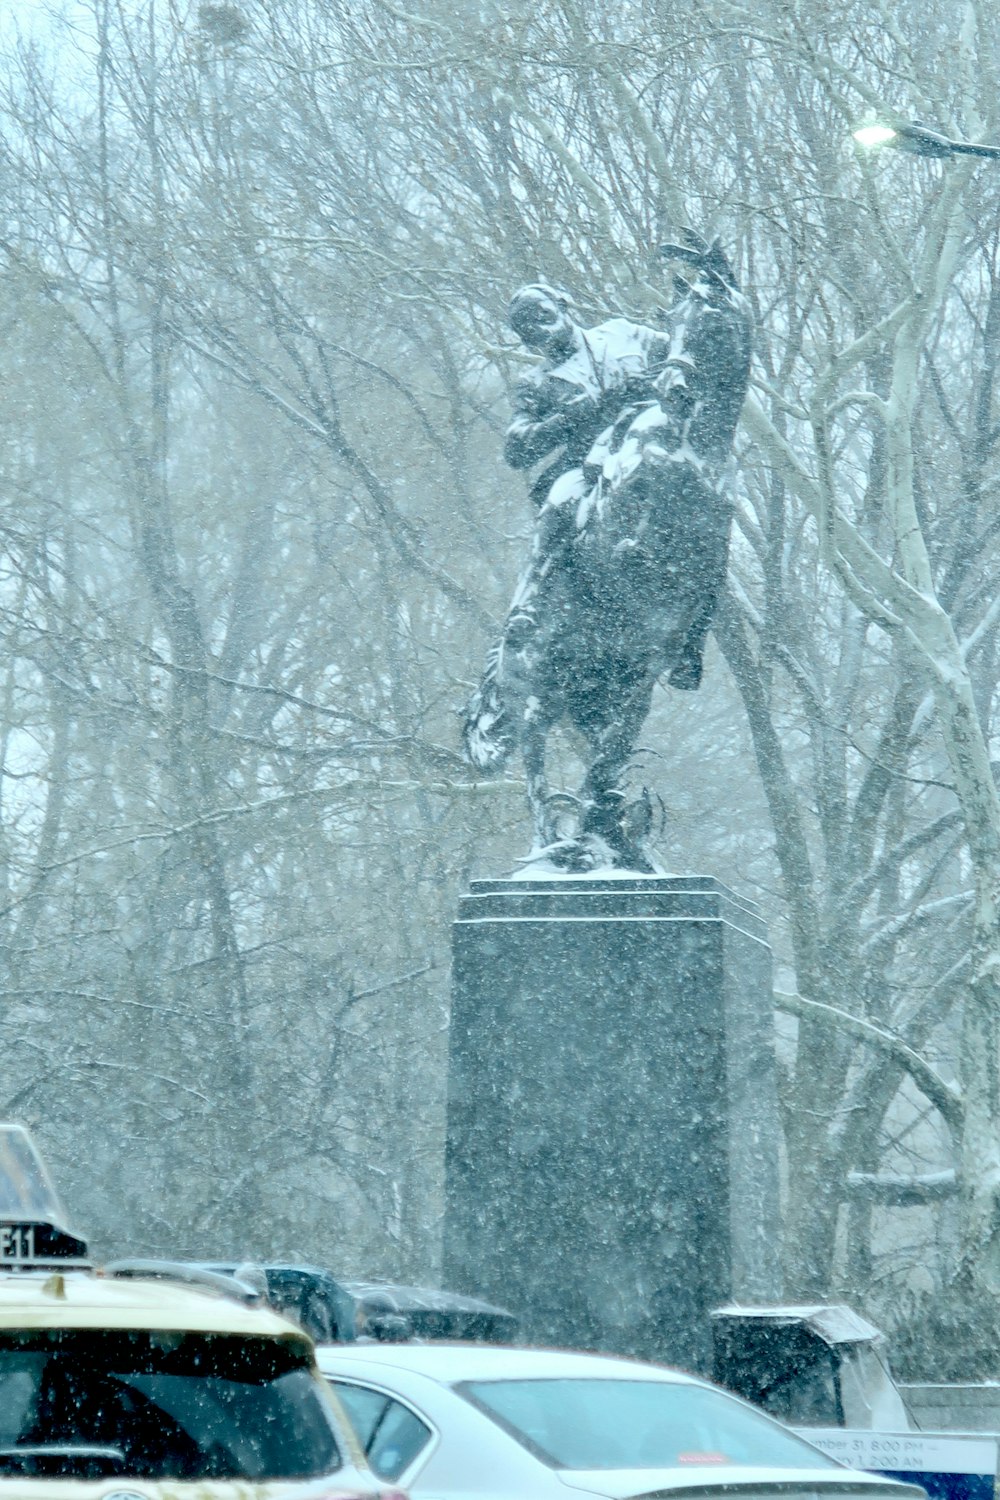 a statue in a snowy place